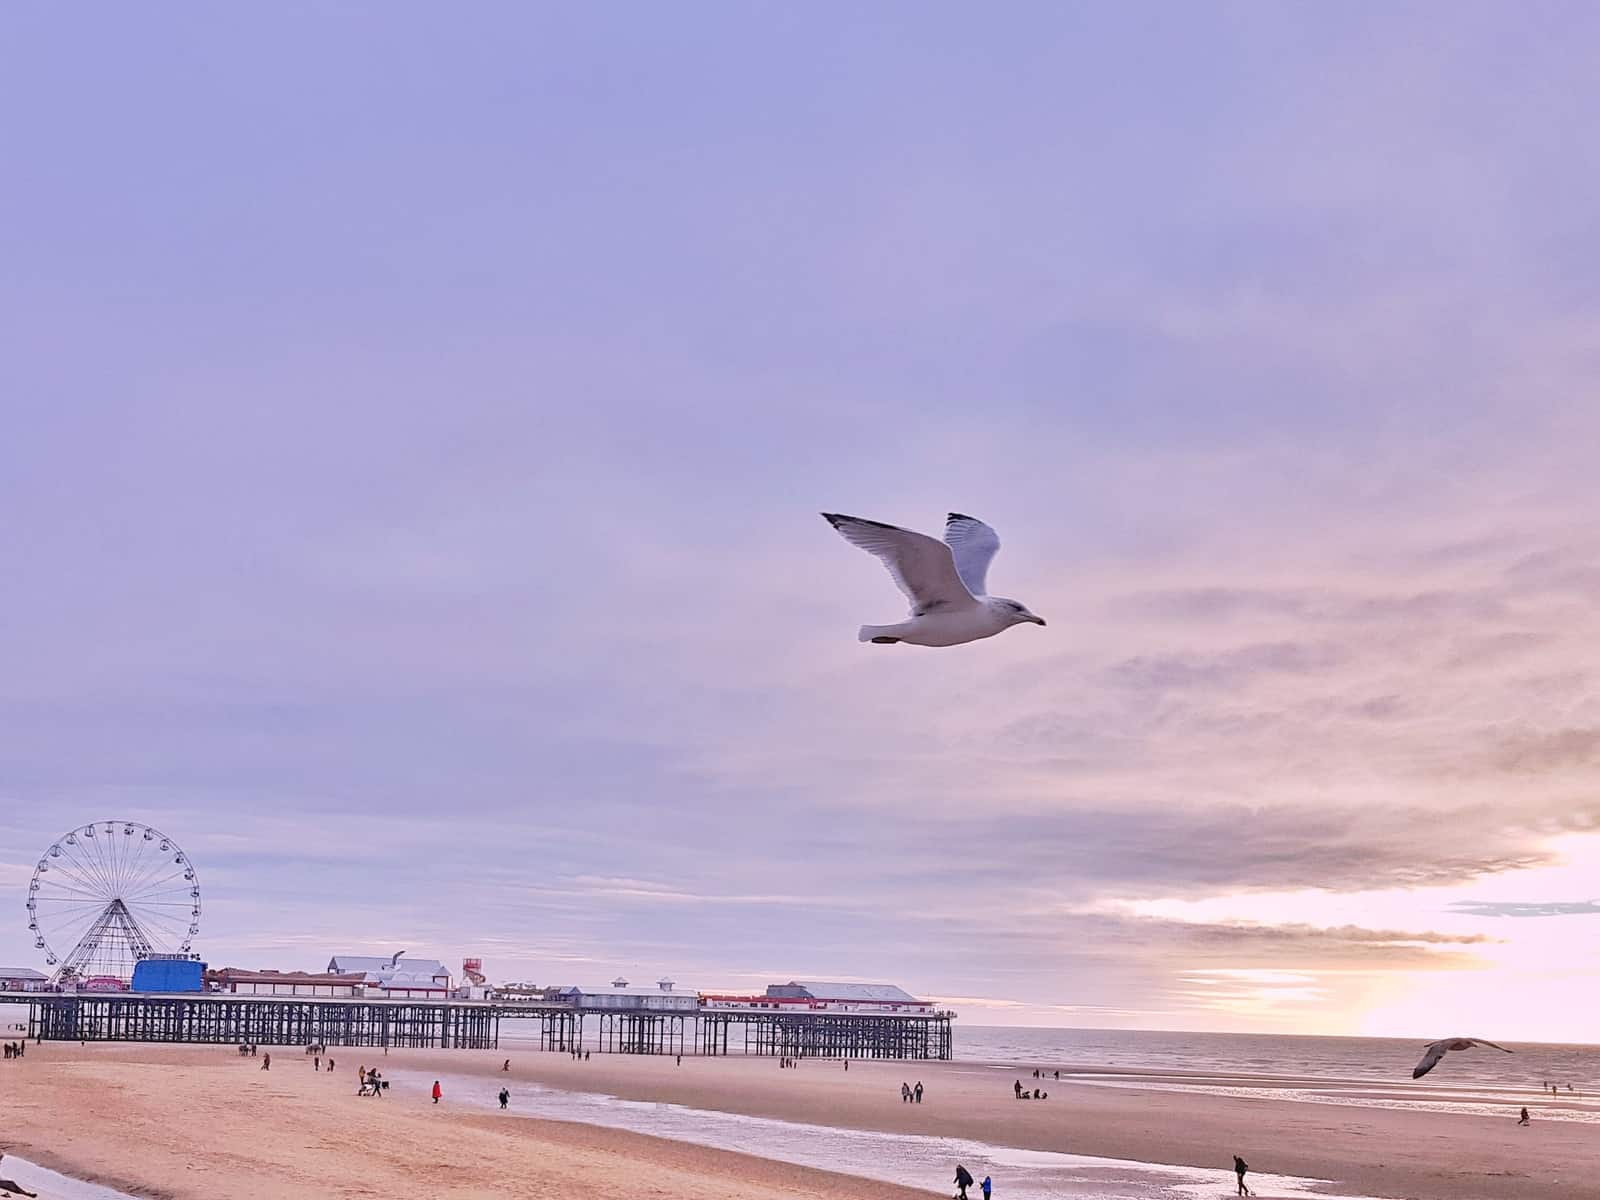 Coral Island Blackpool seafront with seagull in foreground